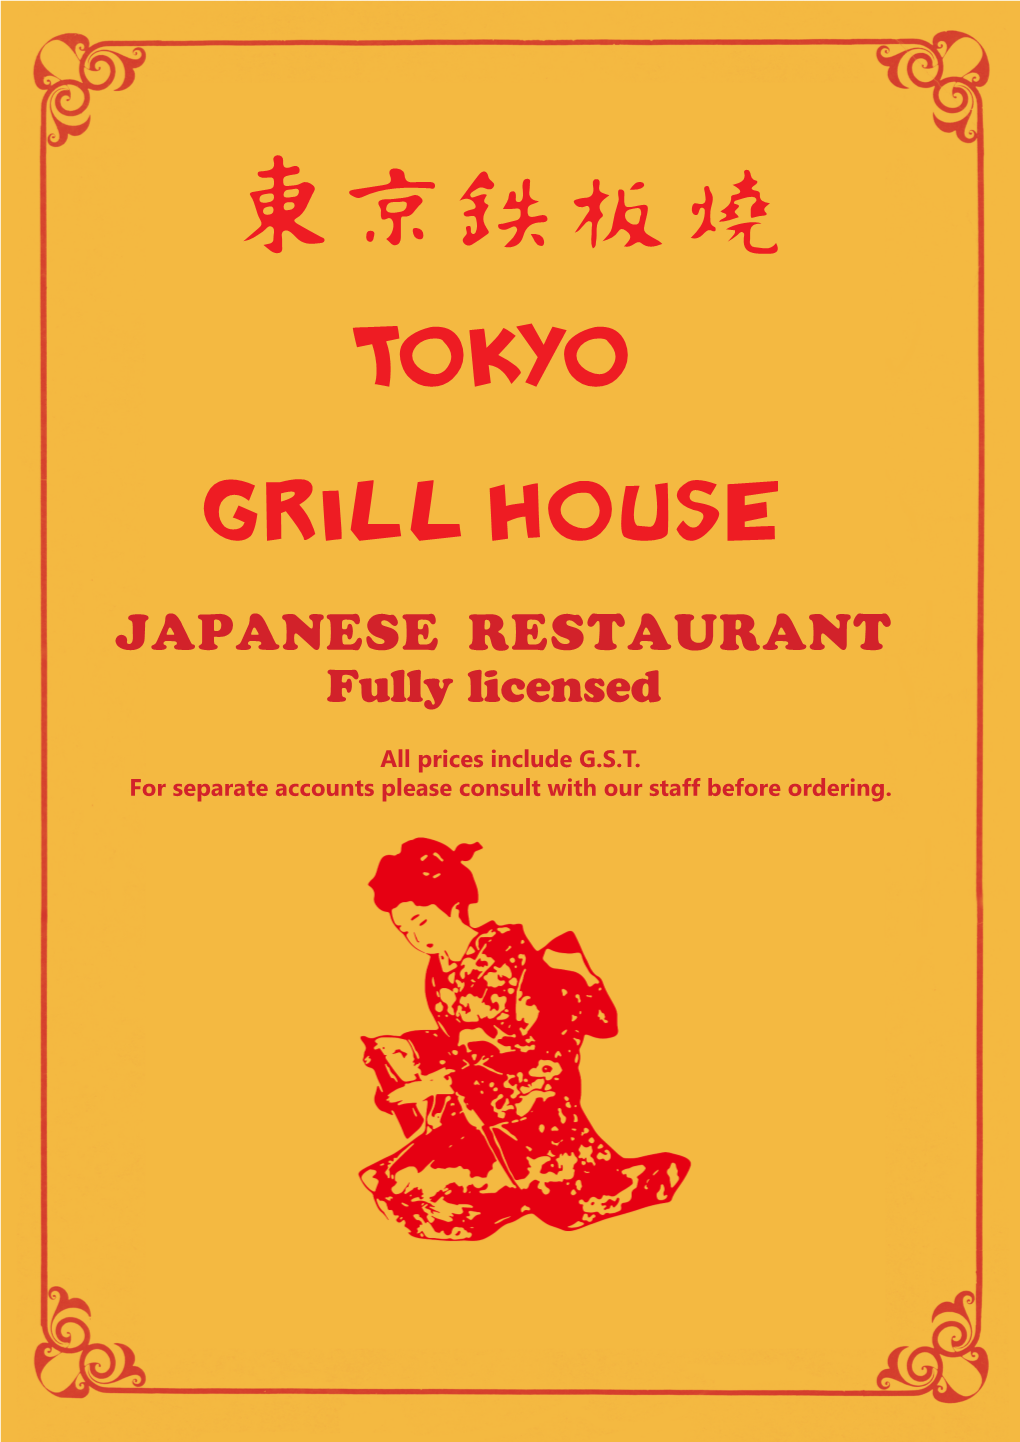 Tokyo Grill House Is a Perfect Double Scoop $7.50 Way to Experience Wagyu Beef